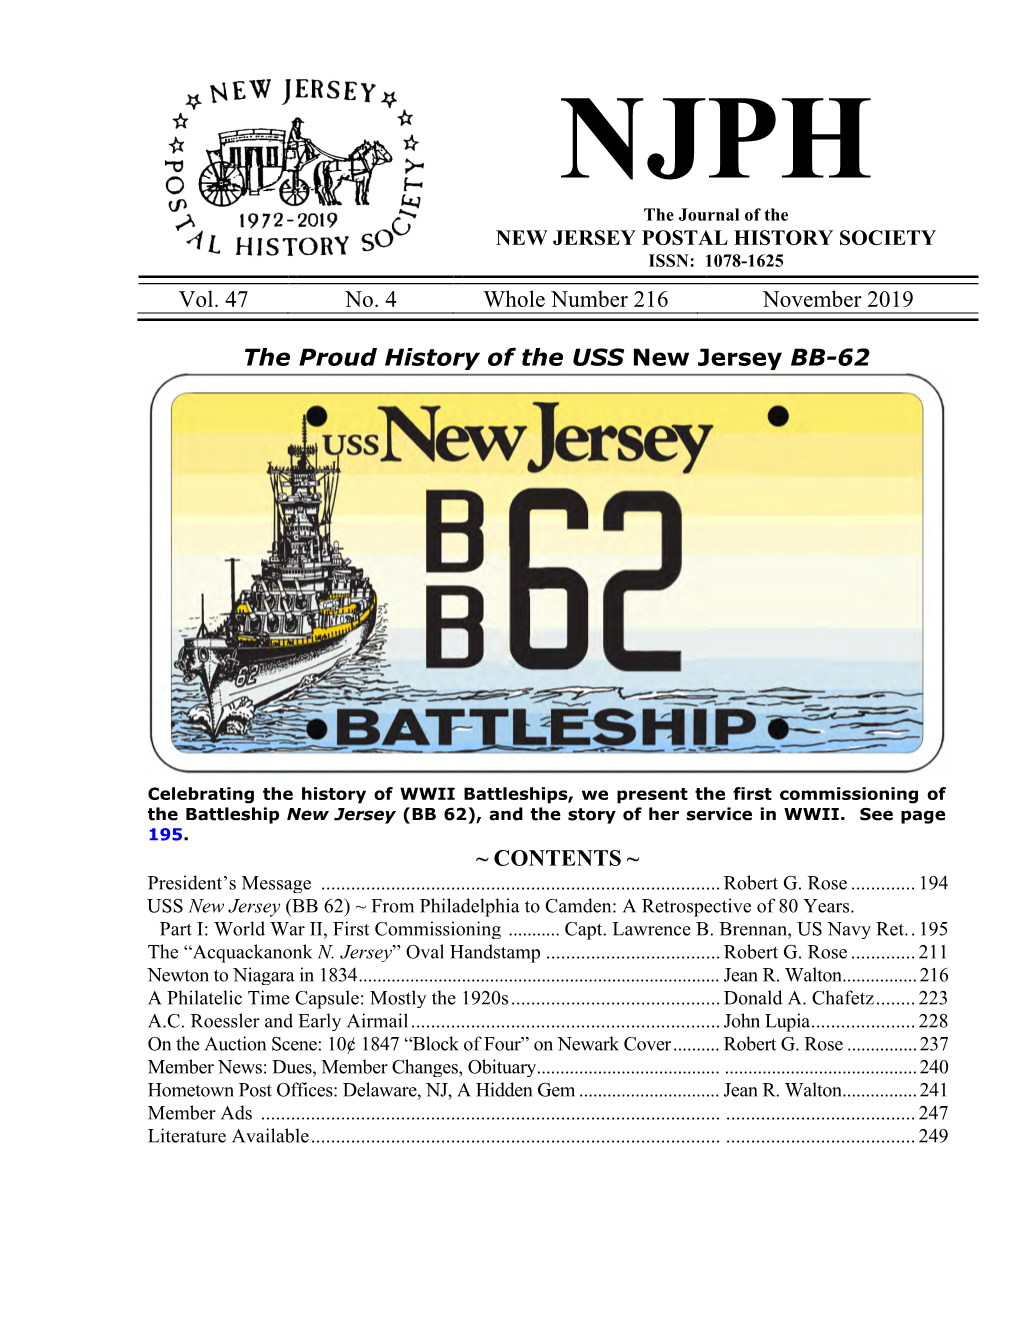 Vol. 47 No. 4 Whole Number 216 November 2019 the Proud History of the USS New Jersey BB-62